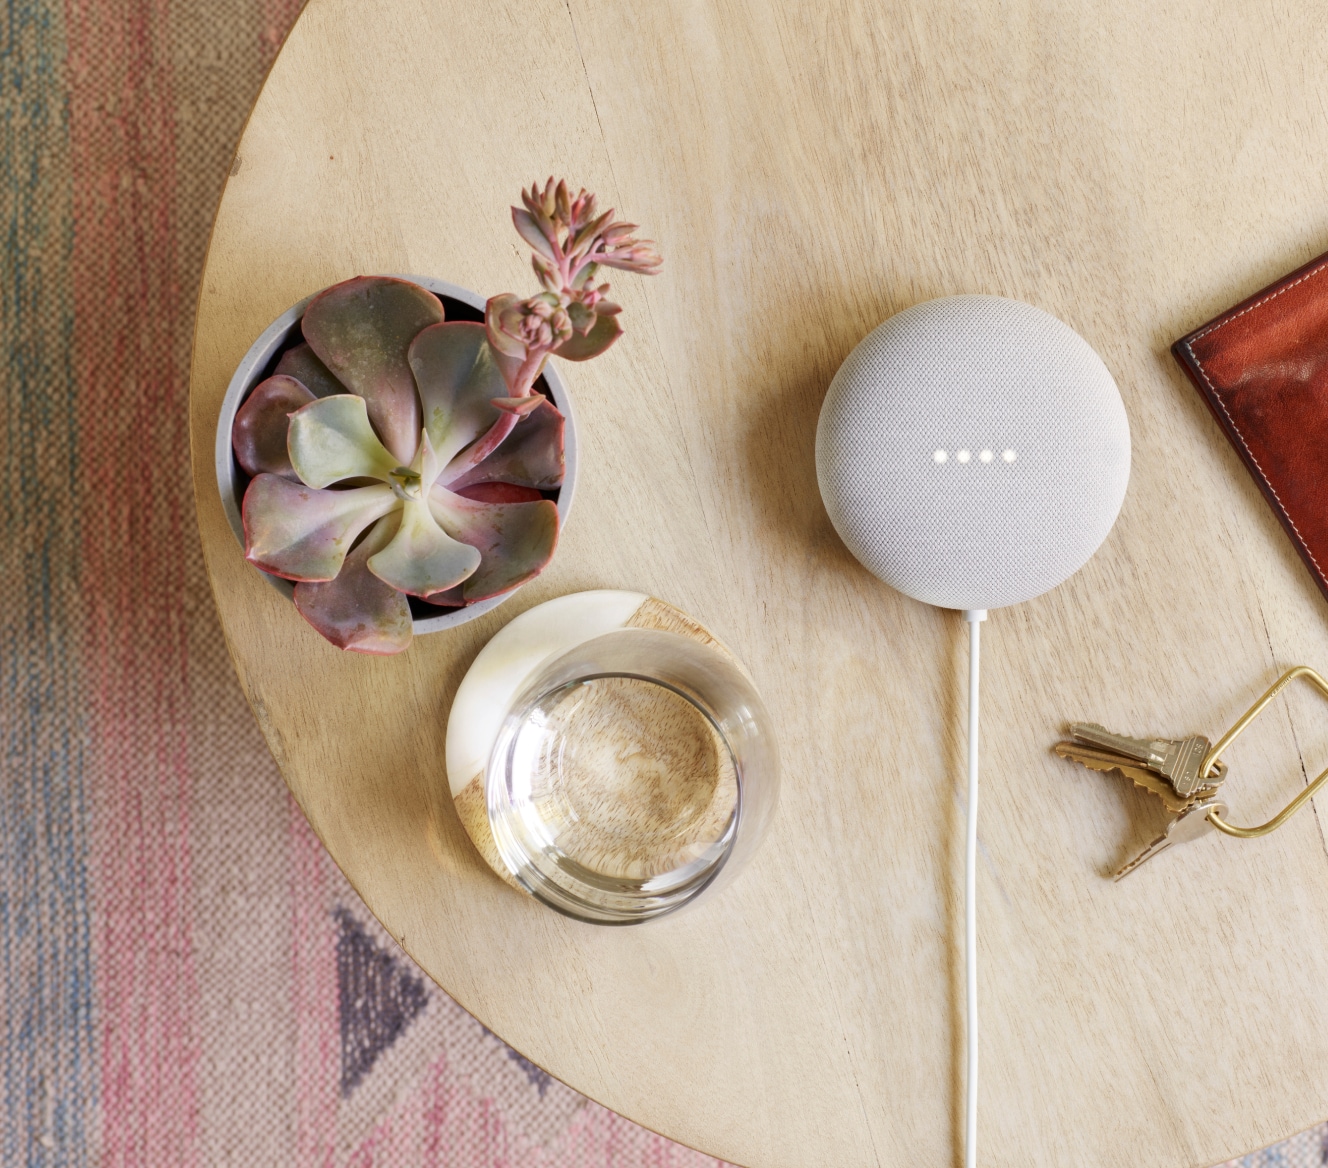 Google Nest Mini on a table with succulent and house keys